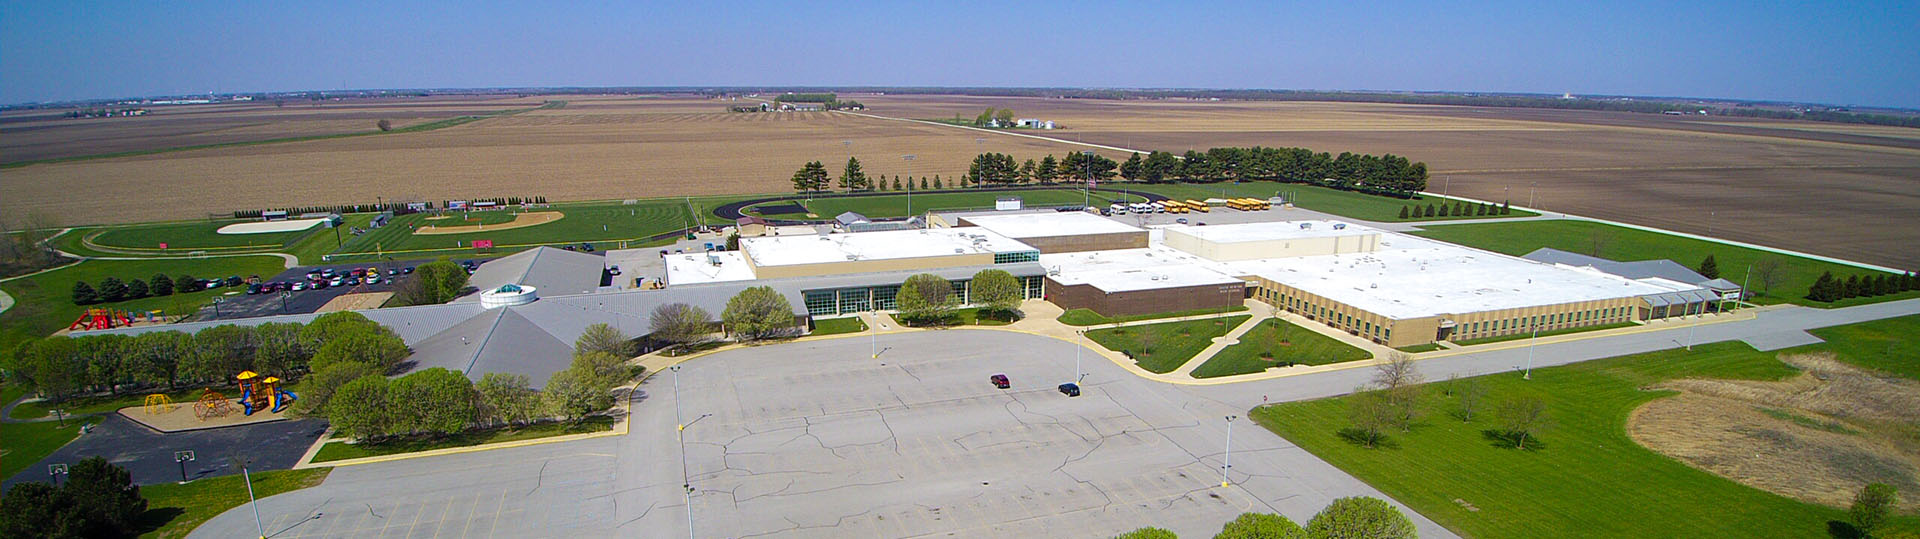 Aerial view of South Newton High School